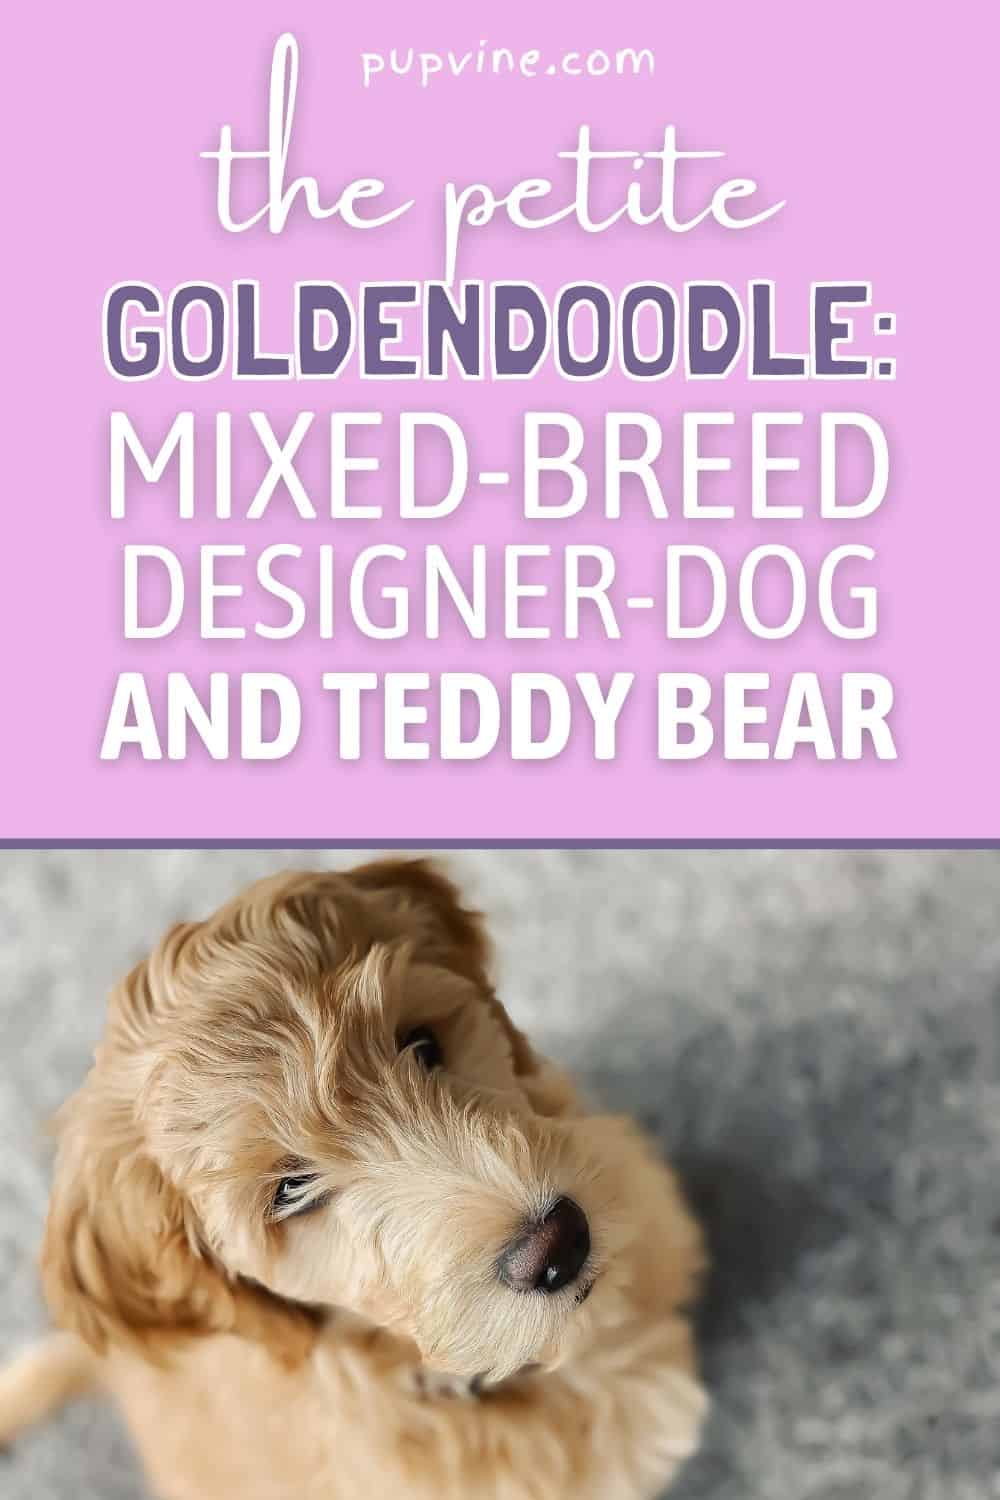 The Petite Goldendoodle: Mixed-Breed Designer-Dog And Teddy Bear!